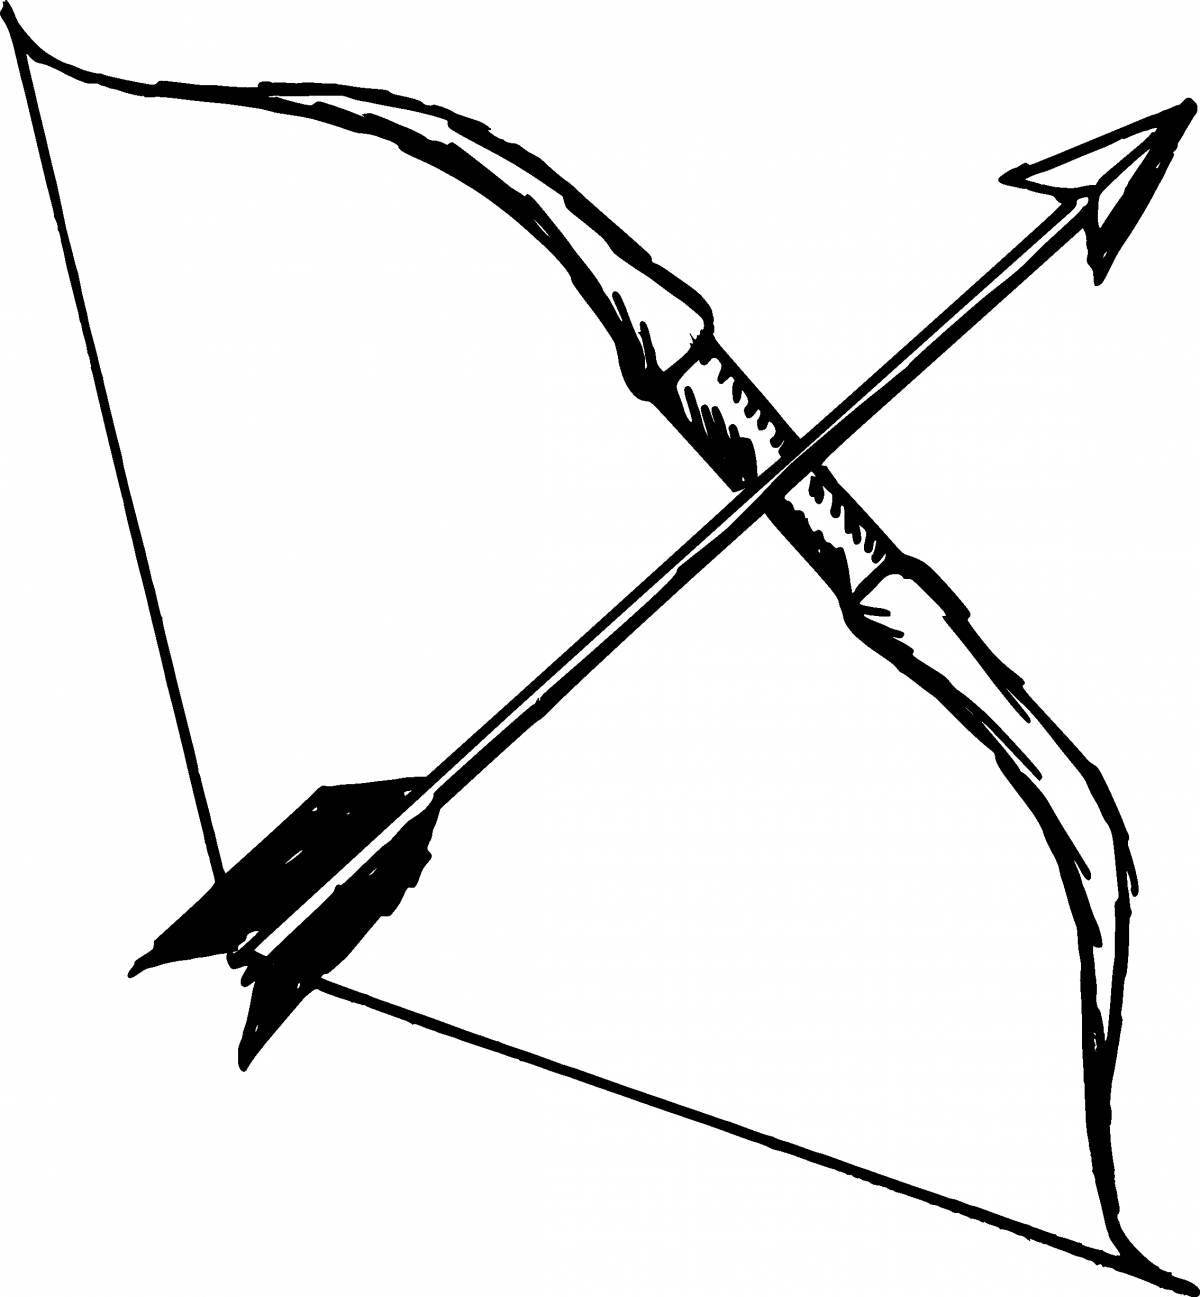 Exquisite bow weapon coloring page